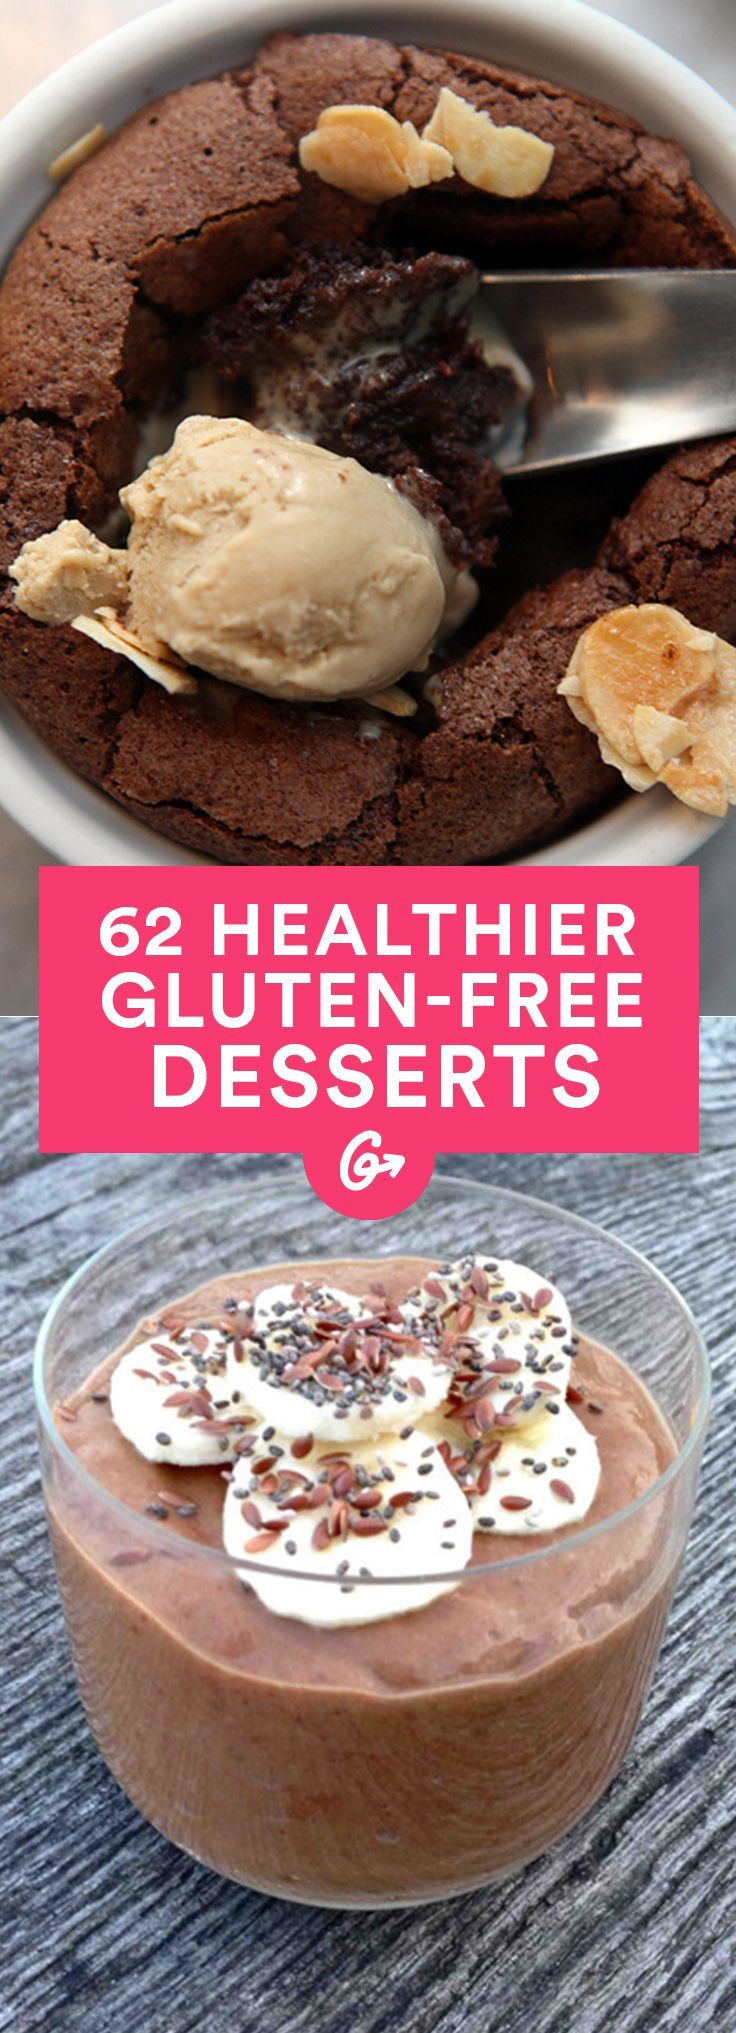 Healthy Gluten Free Dessert Recipes
 Glutenfree Healthy recipes and Saying goodbye on Pinterest